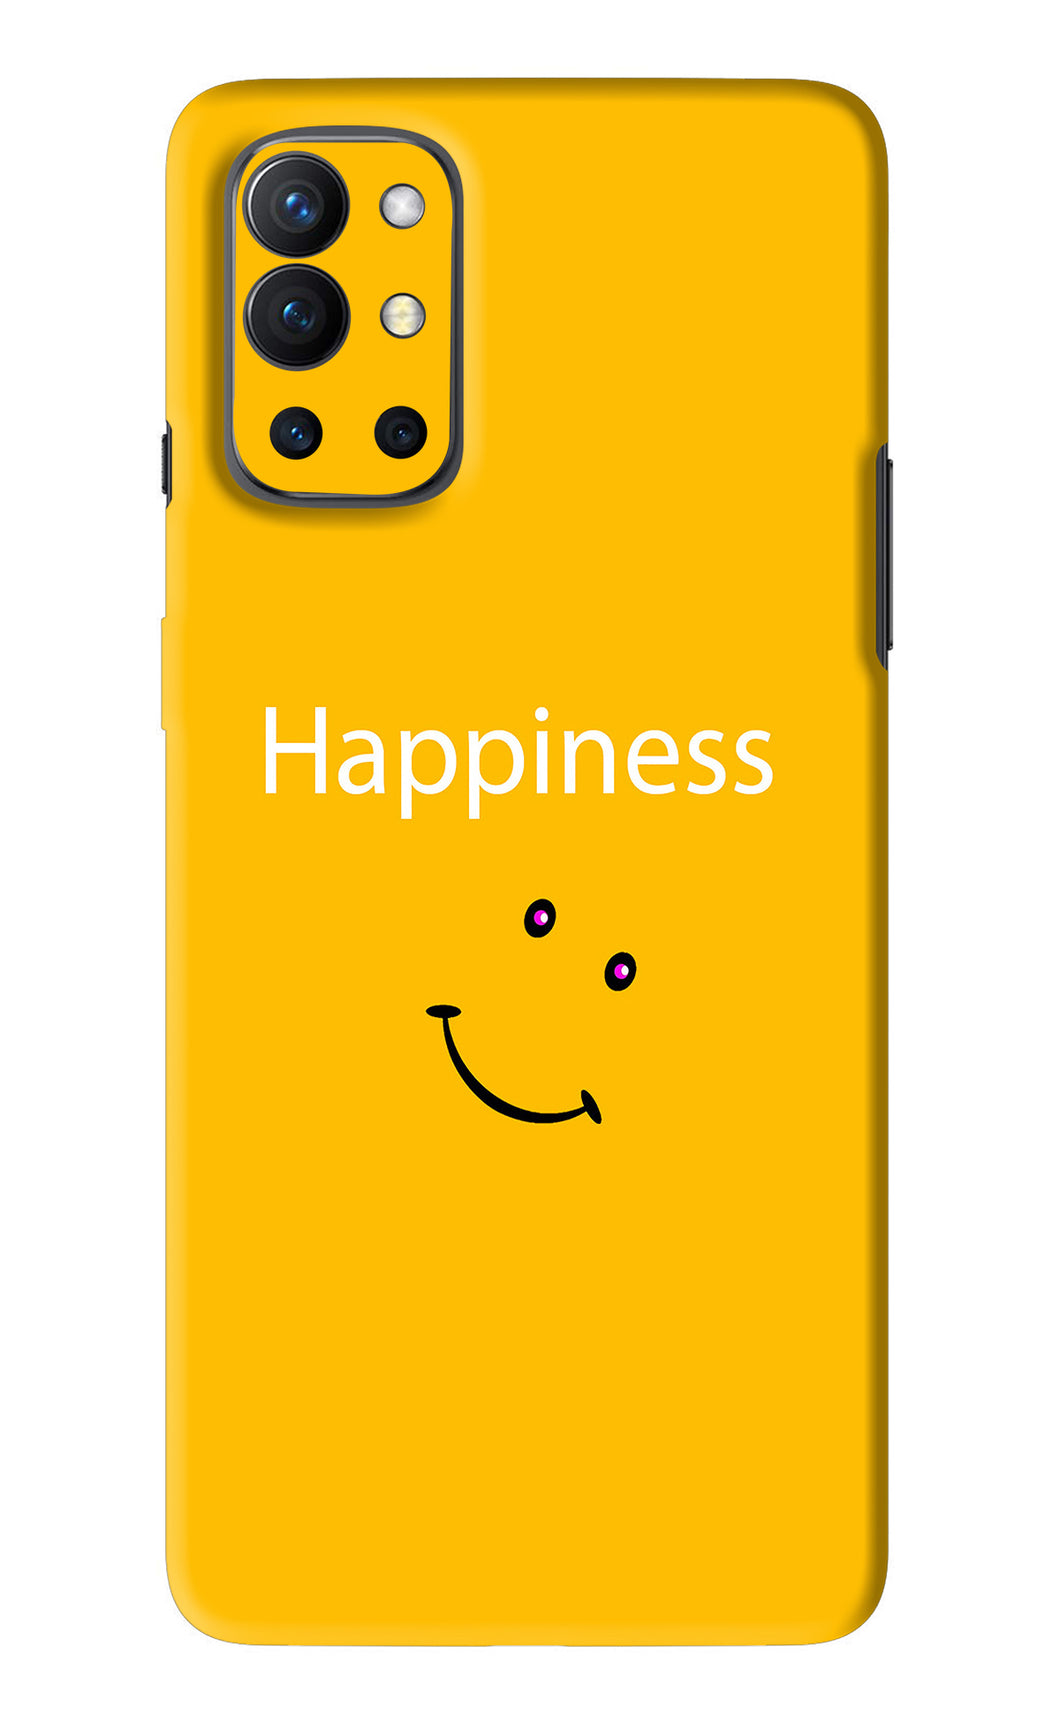 Happiness With Smiley OnePlus 9R Back Skin Wrap